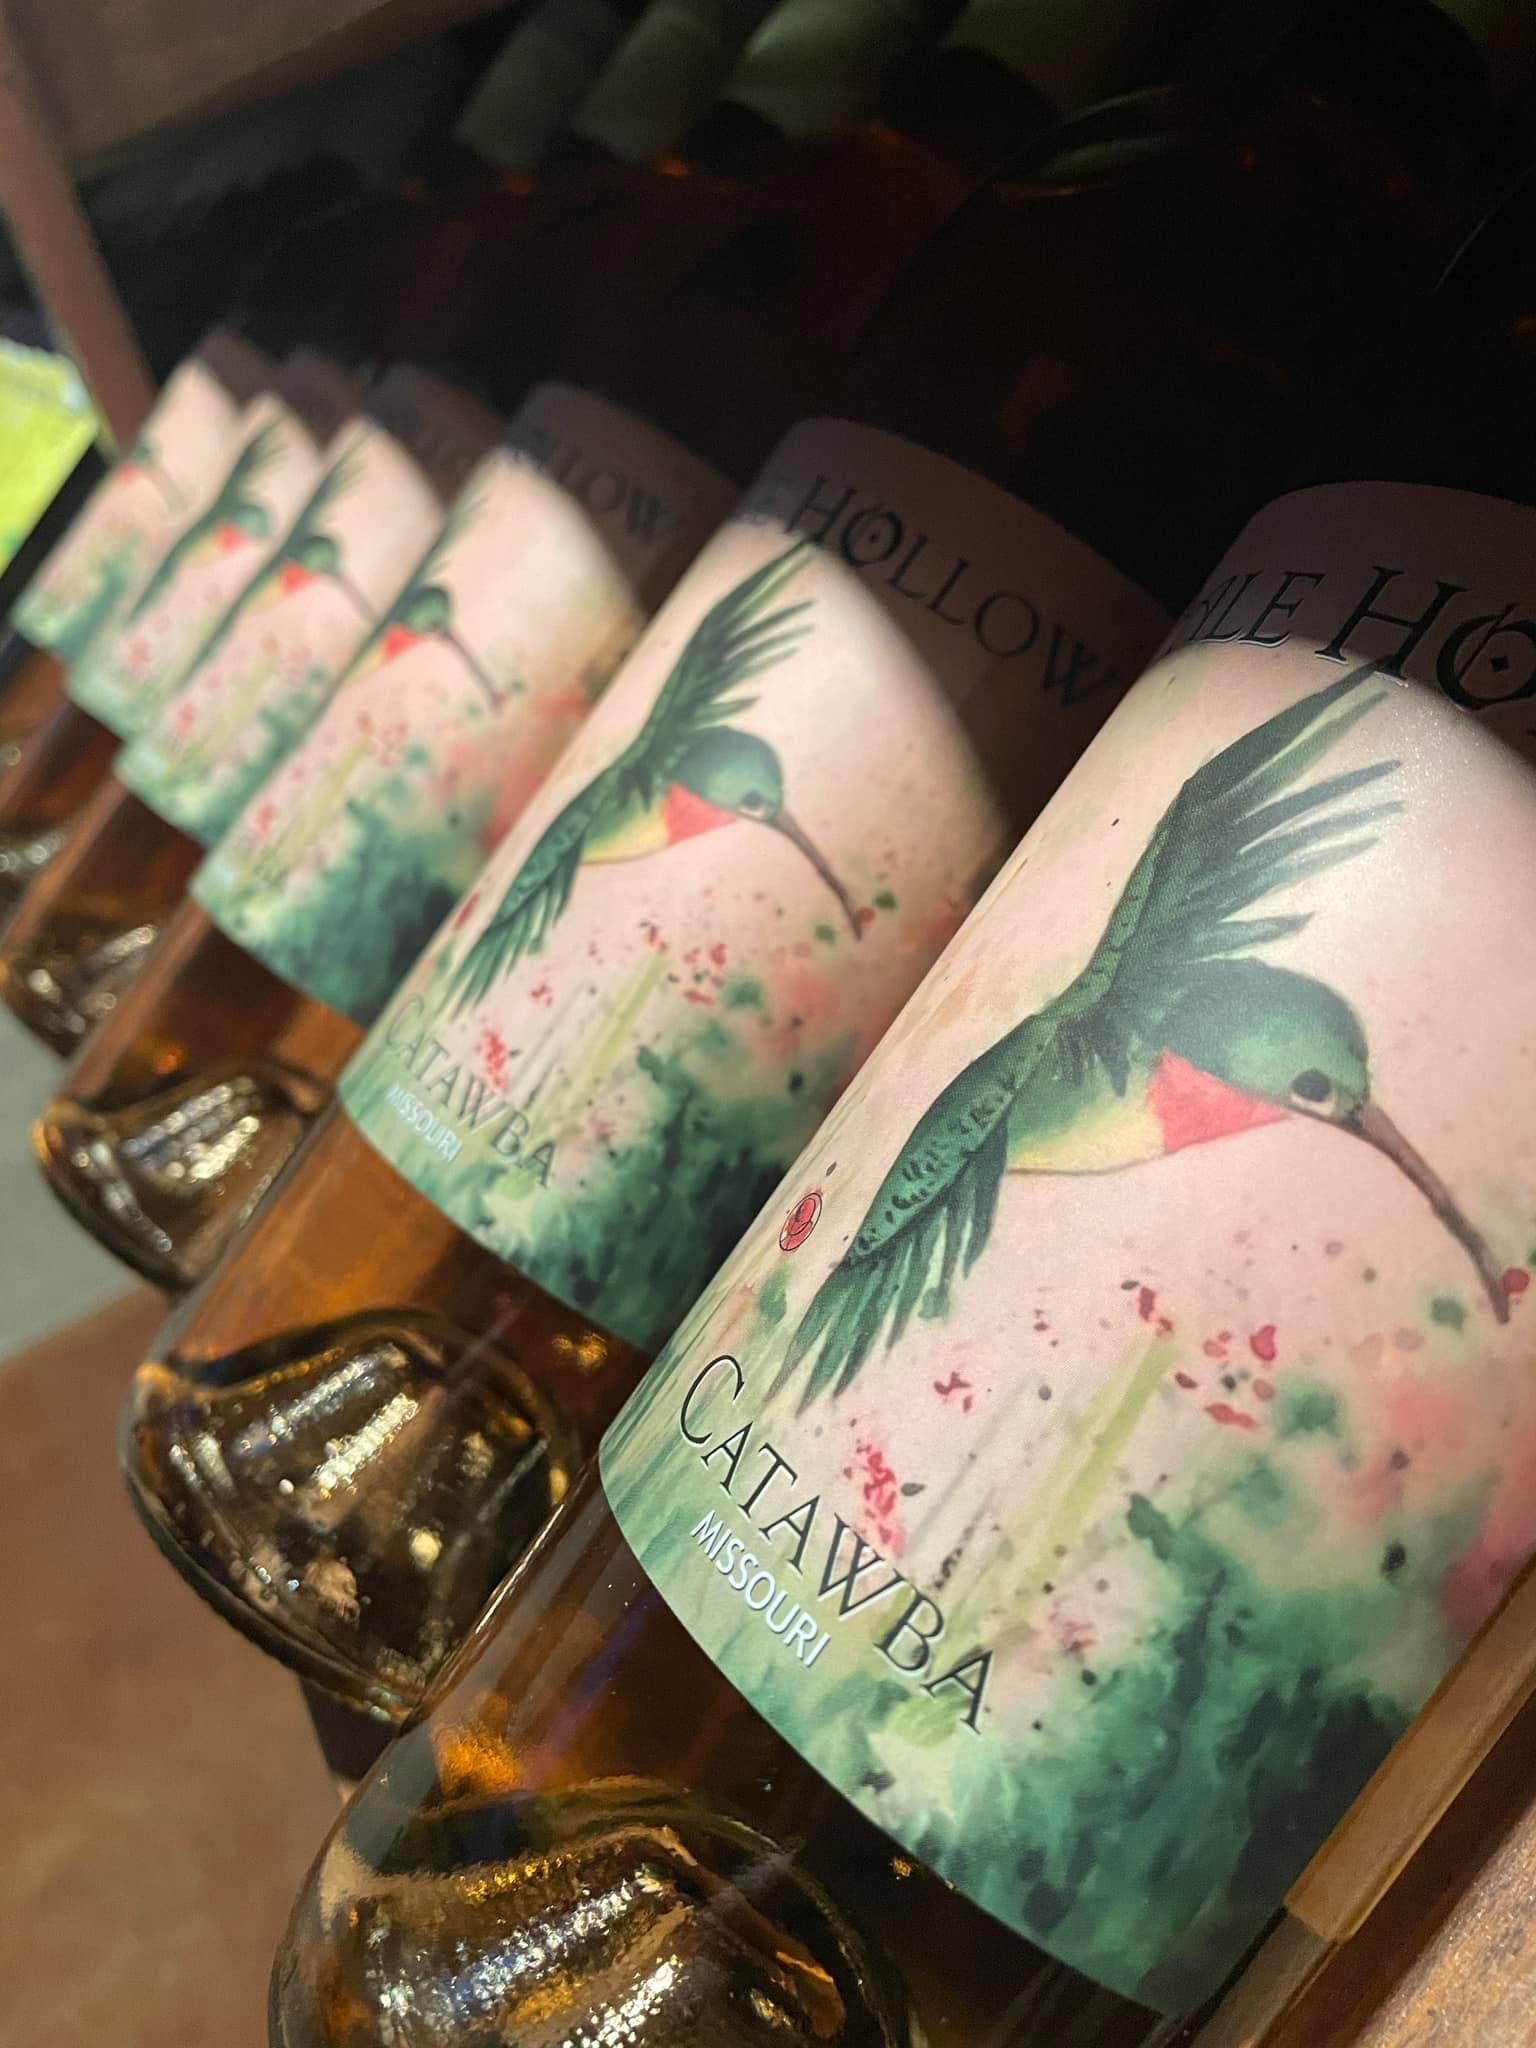 Bottles of Dale Hollow Winery's Catawba